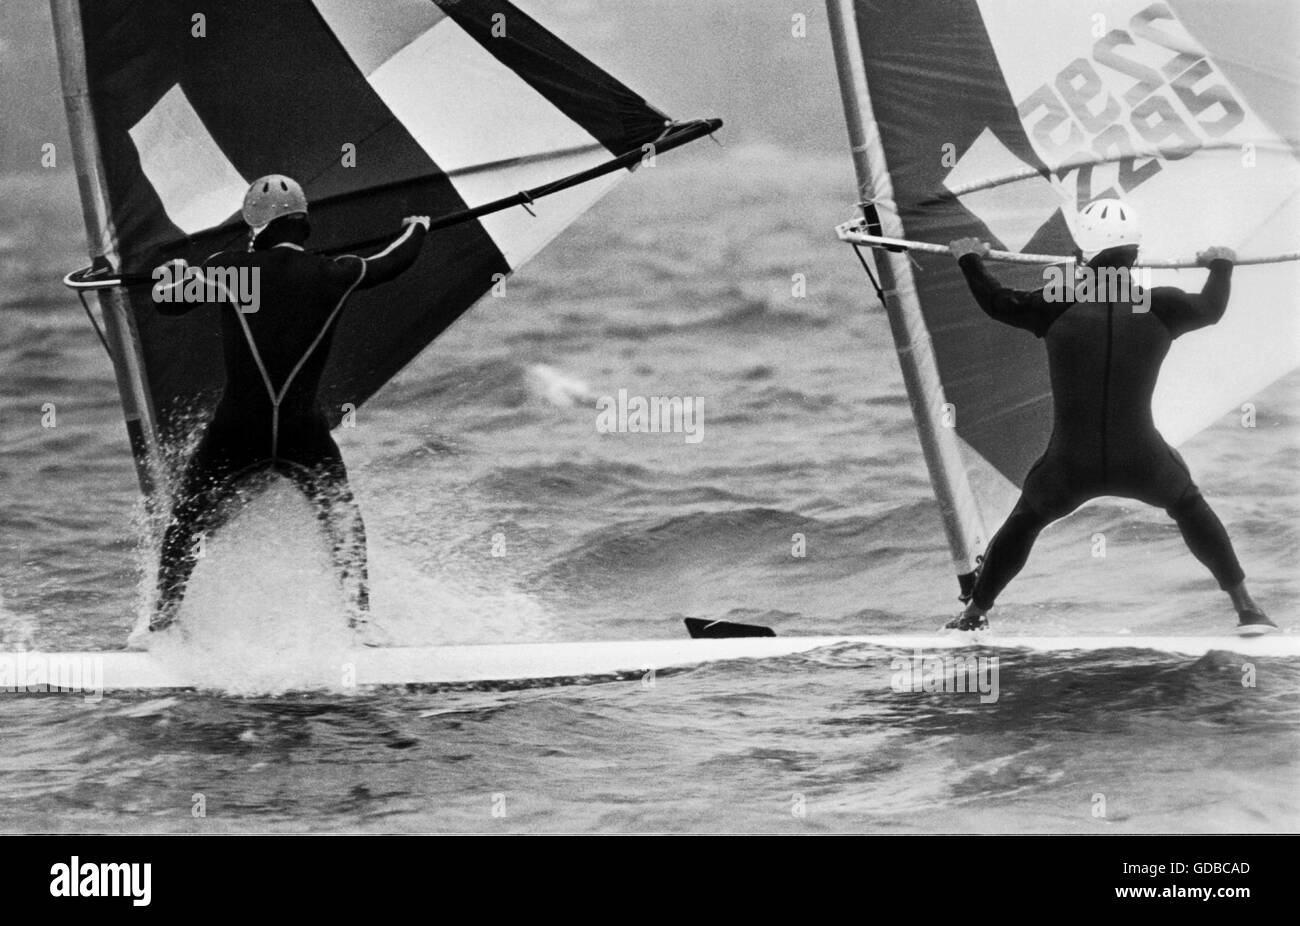 Nouvelles photos d'AJAX. OCT 1975. WEYMOUTH, Angleterre. - JOHN PLAYER SPECIAL WORLD SAILING SPEED TRIALS -PLANCHE TANDEM, CLIVE COLENZO (GB) A ATTEINT UNE VITESSE DE 13 NŒUDS. PHOTO:JONATHAN EASTLAND/AJAX REF:YAR   1975 TANDEM WEY Banque D'Images